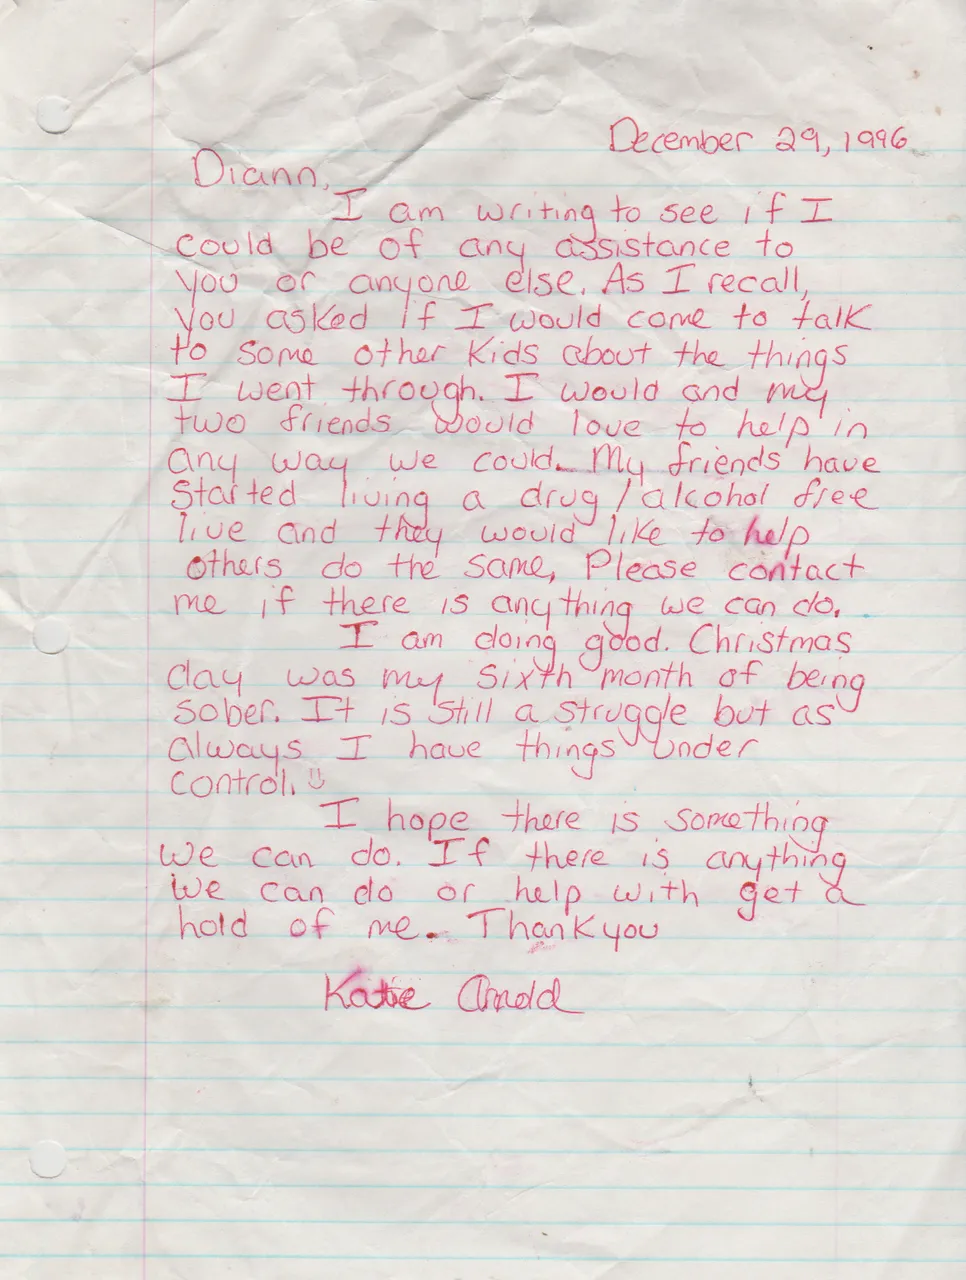 1996-12-29 - Sunday - Katie Arnold Letter to Diann regarding helping others with drug rehab.png